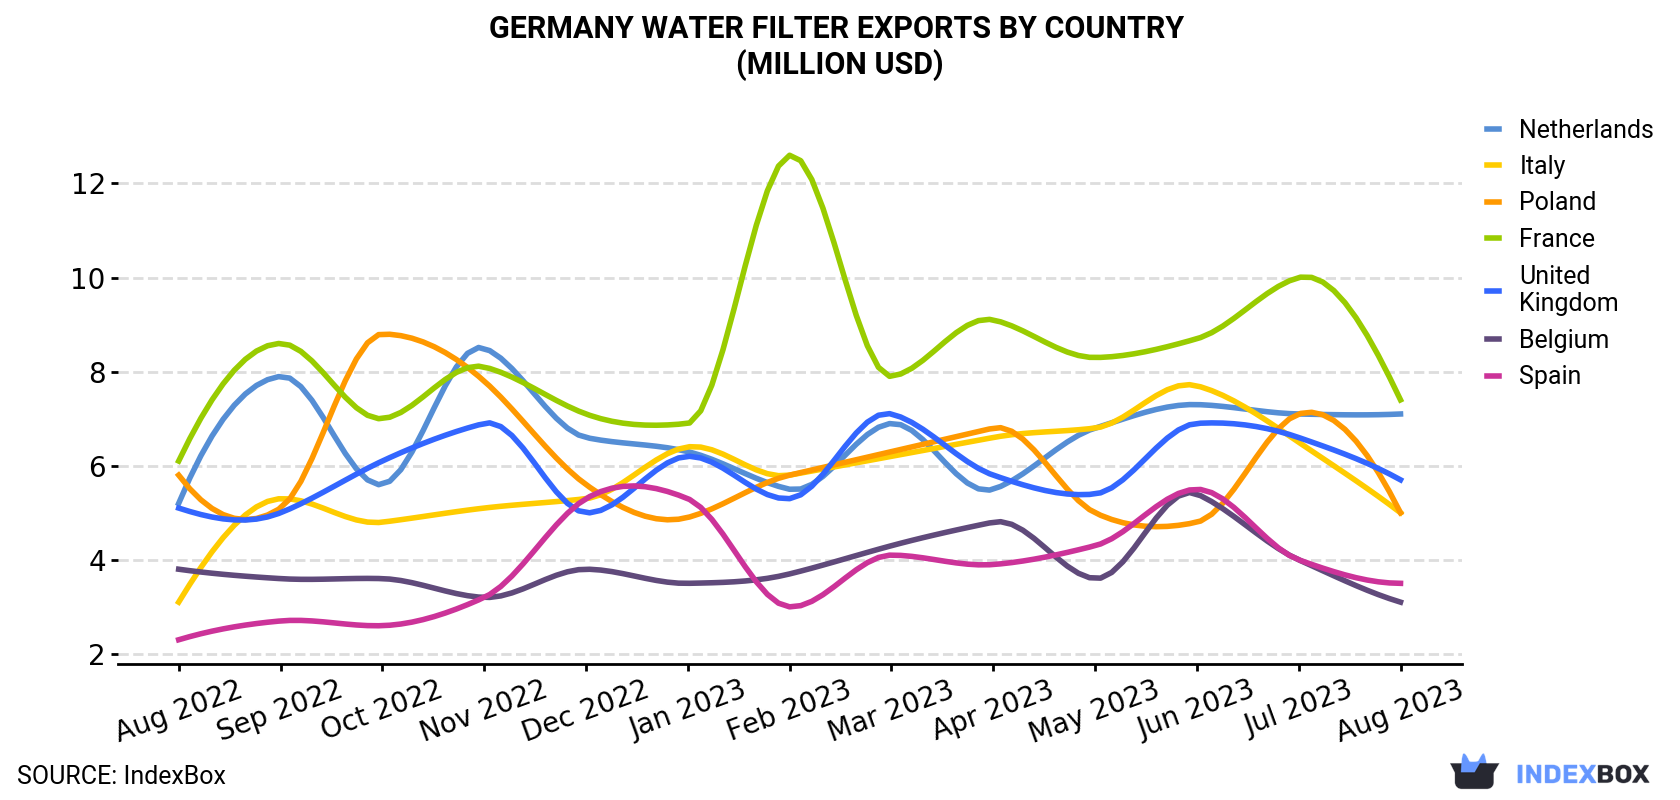 Germany Water Filter Exports By Country (Million USD)